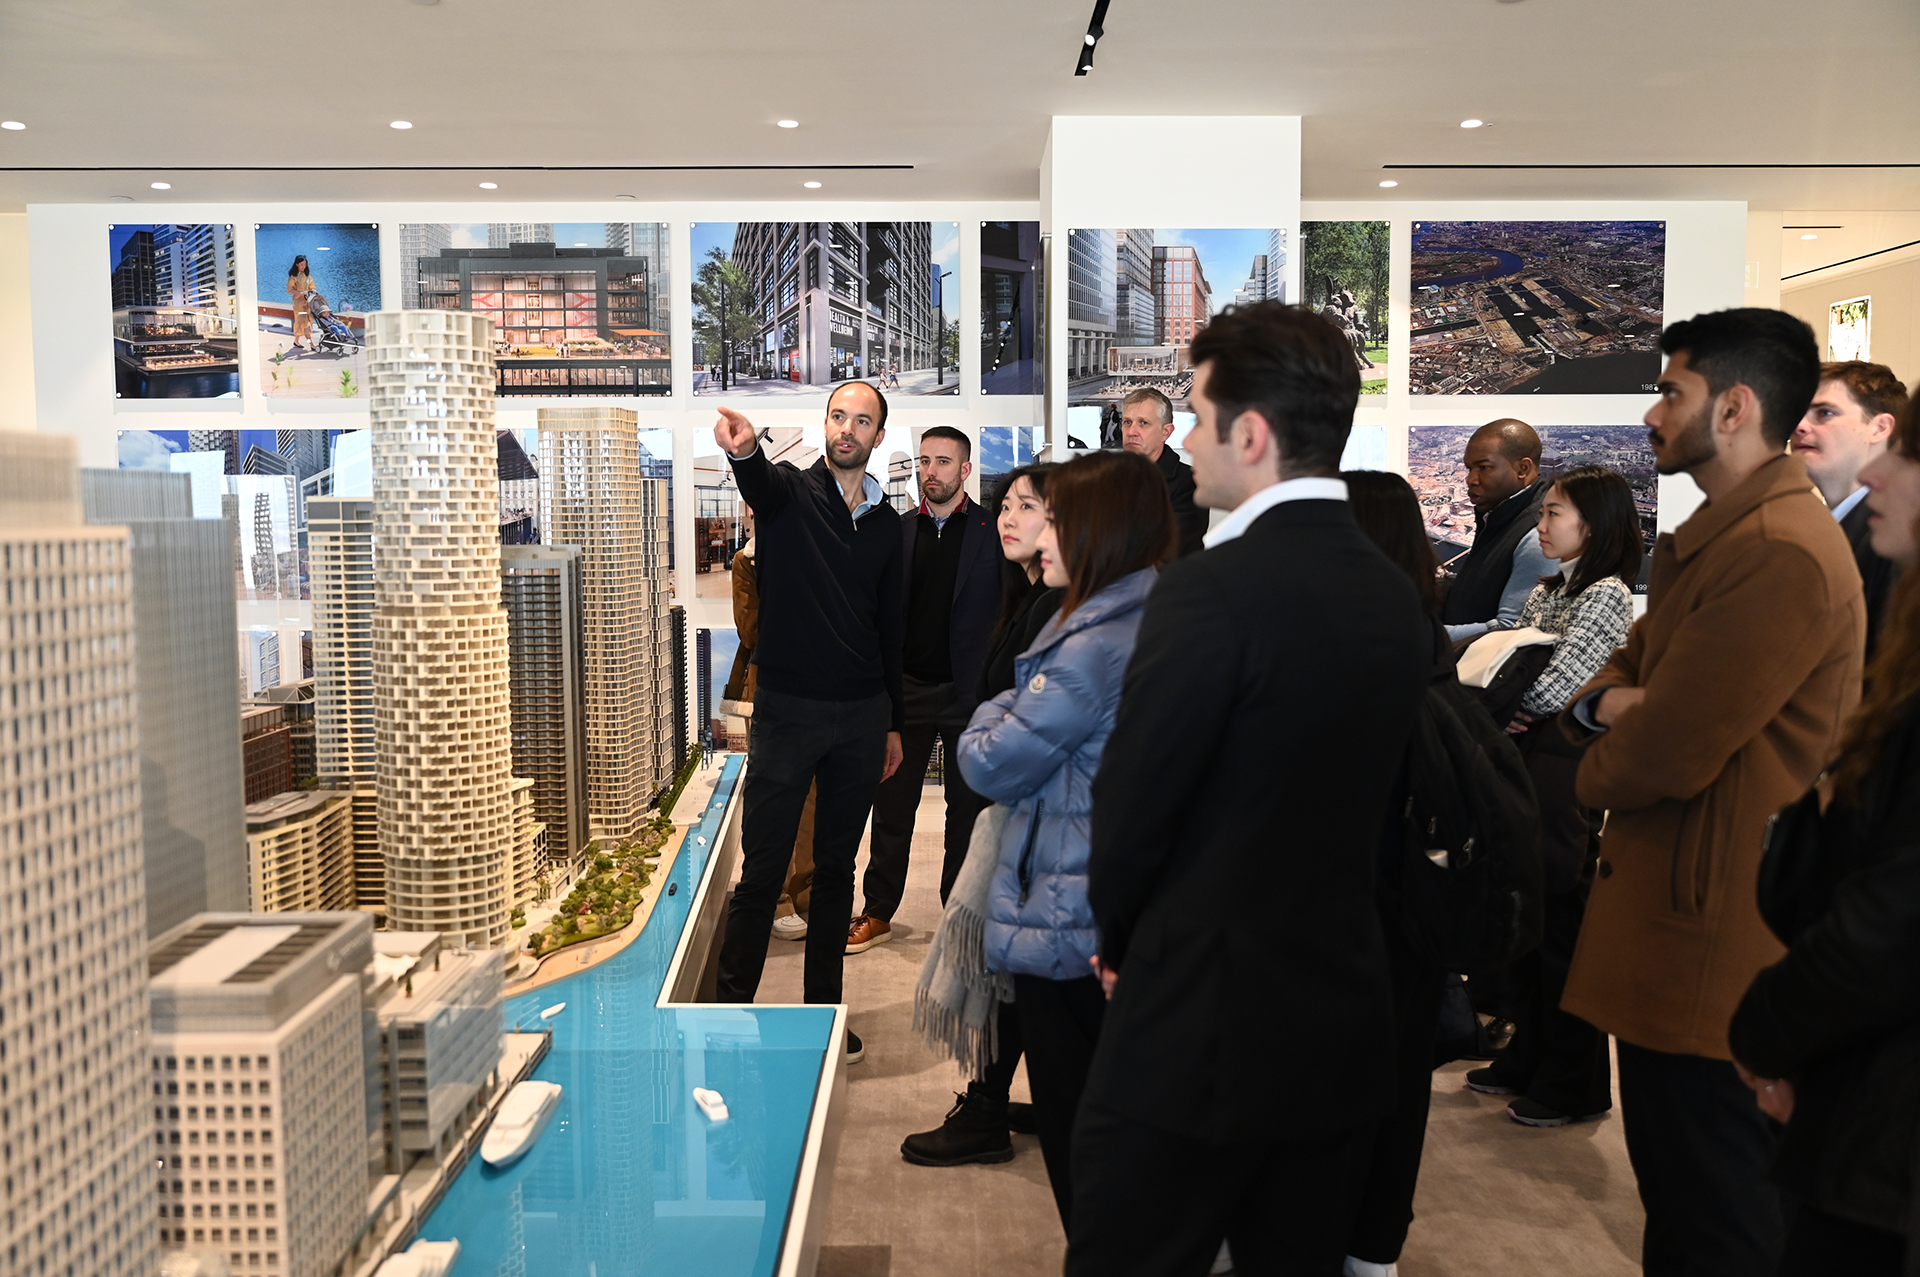 Man in front of a model of a city speaking to a group of students